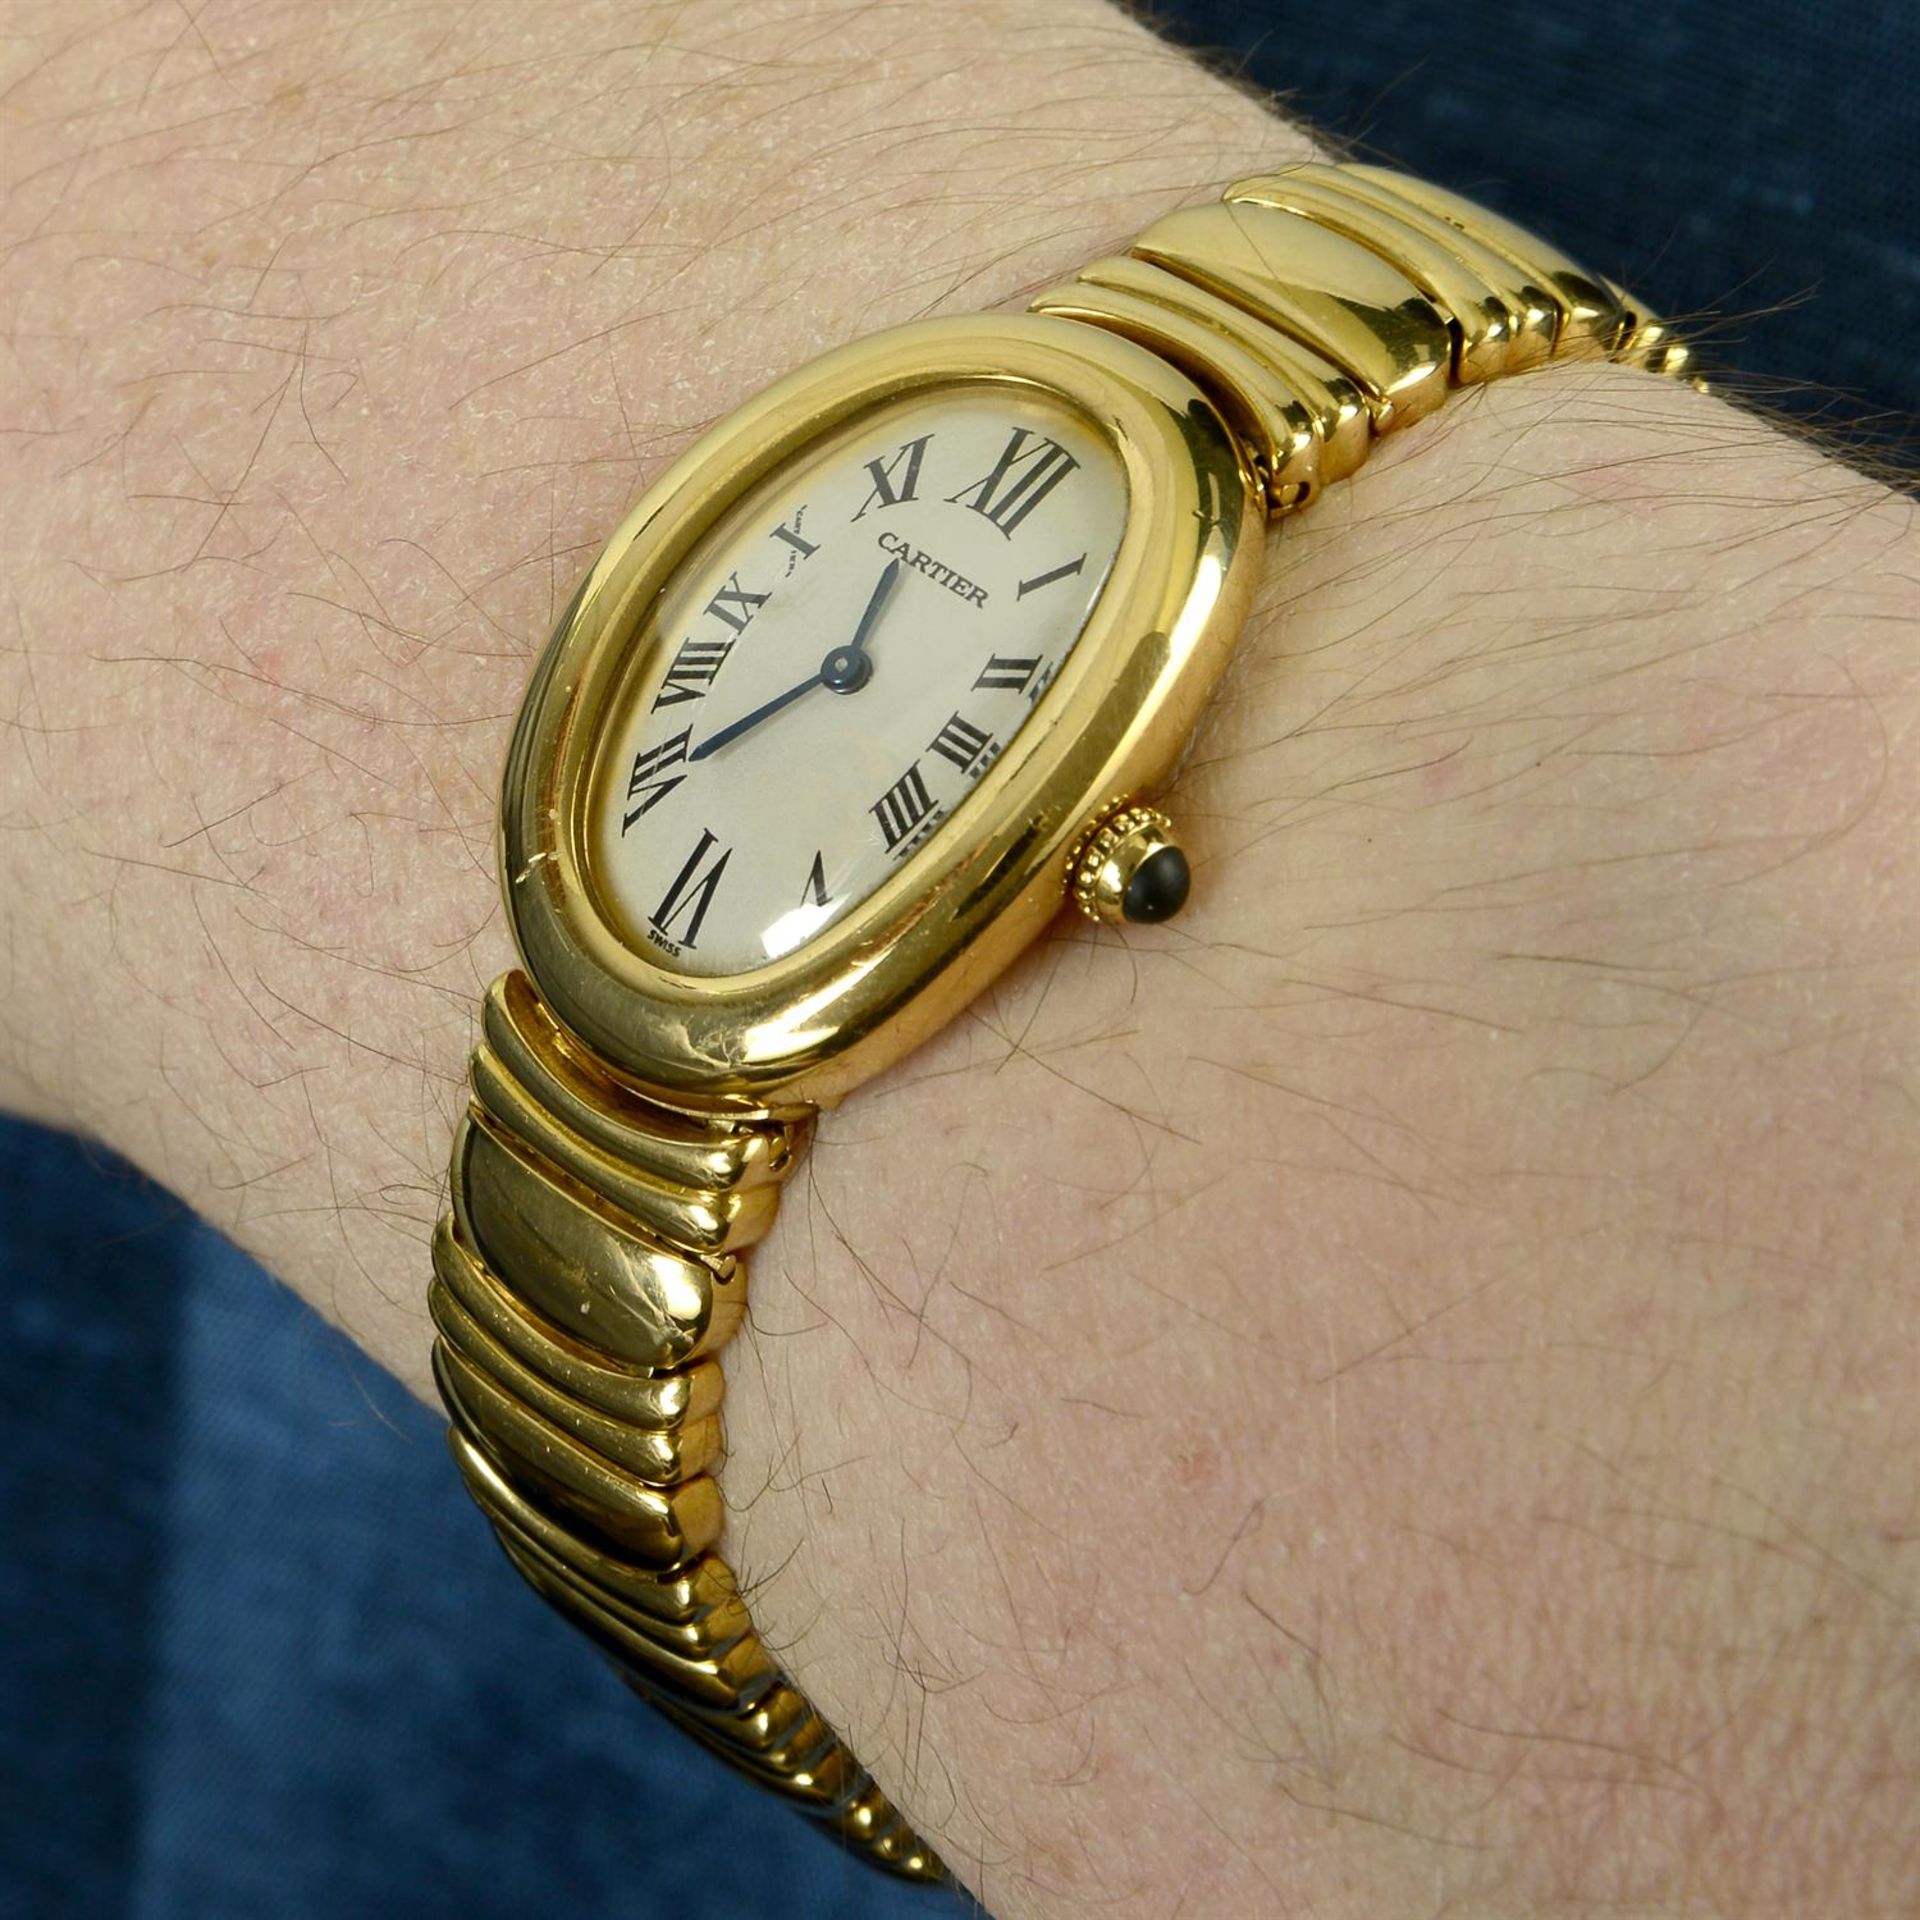 CARTIER - an 18ct yellow gold Baignoire bracelet watch, 22mmx30mm. - Image 6 of 6